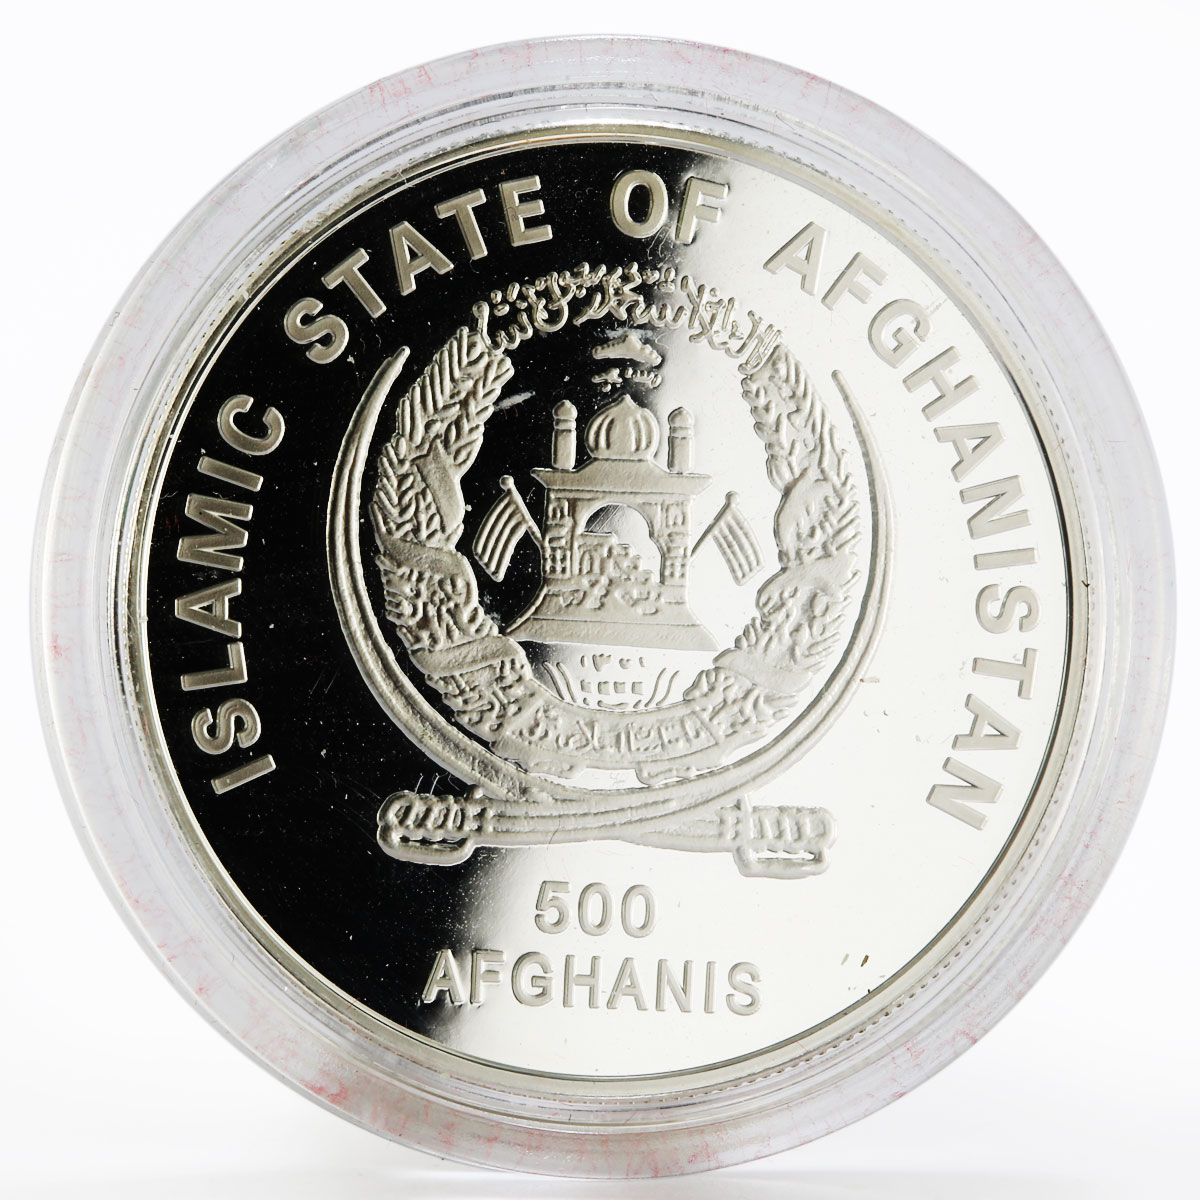 Afghanistan 500 afghanis Football World Cup Germany 2006 proof silver coin 2001